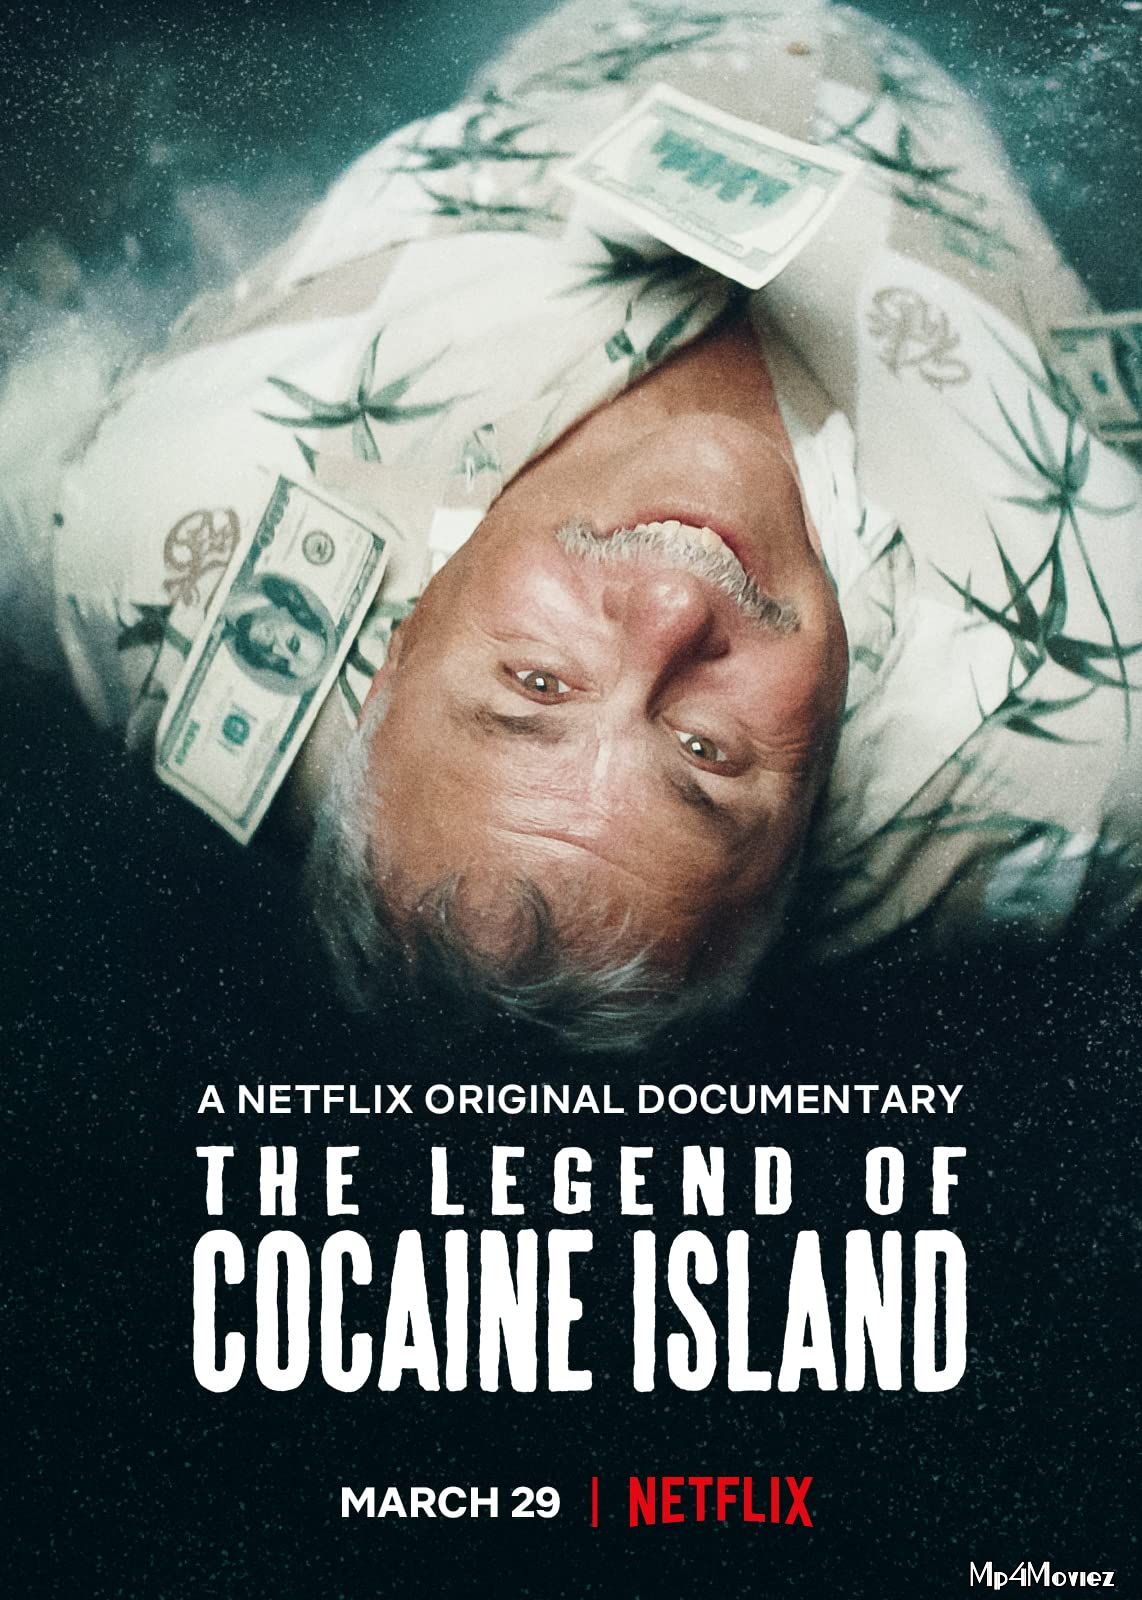 The Legend of Cocaine Island 2019 Hindi Dubbed Full Movie download full movie